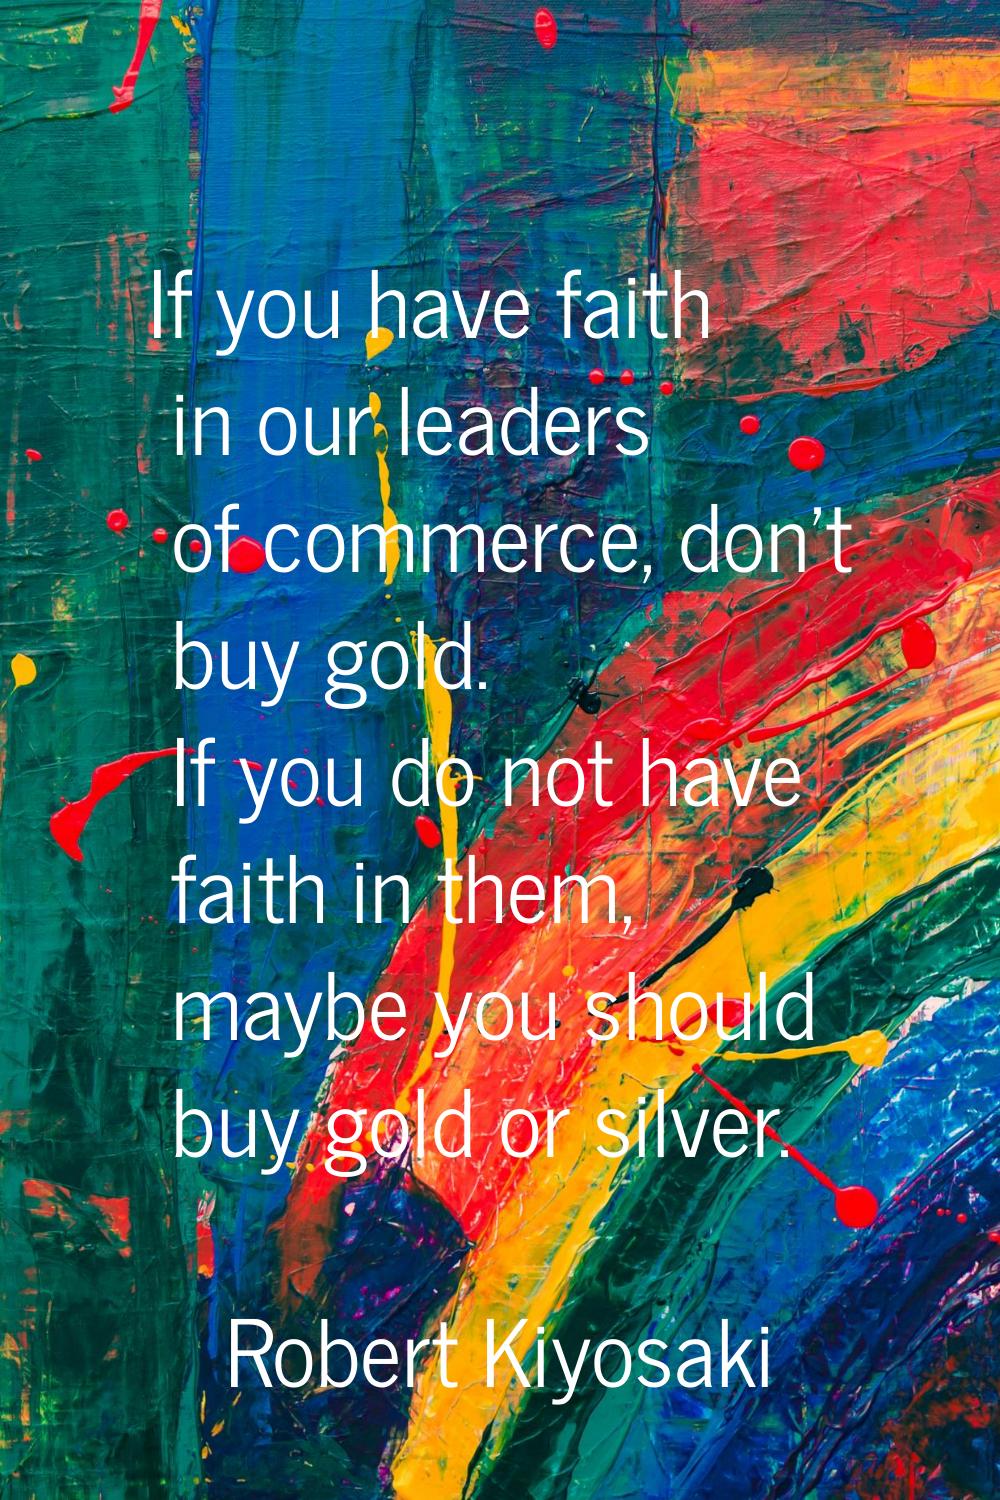 If you have faith in our leaders of commerce, don't buy gold. If you do not have faith in them, may